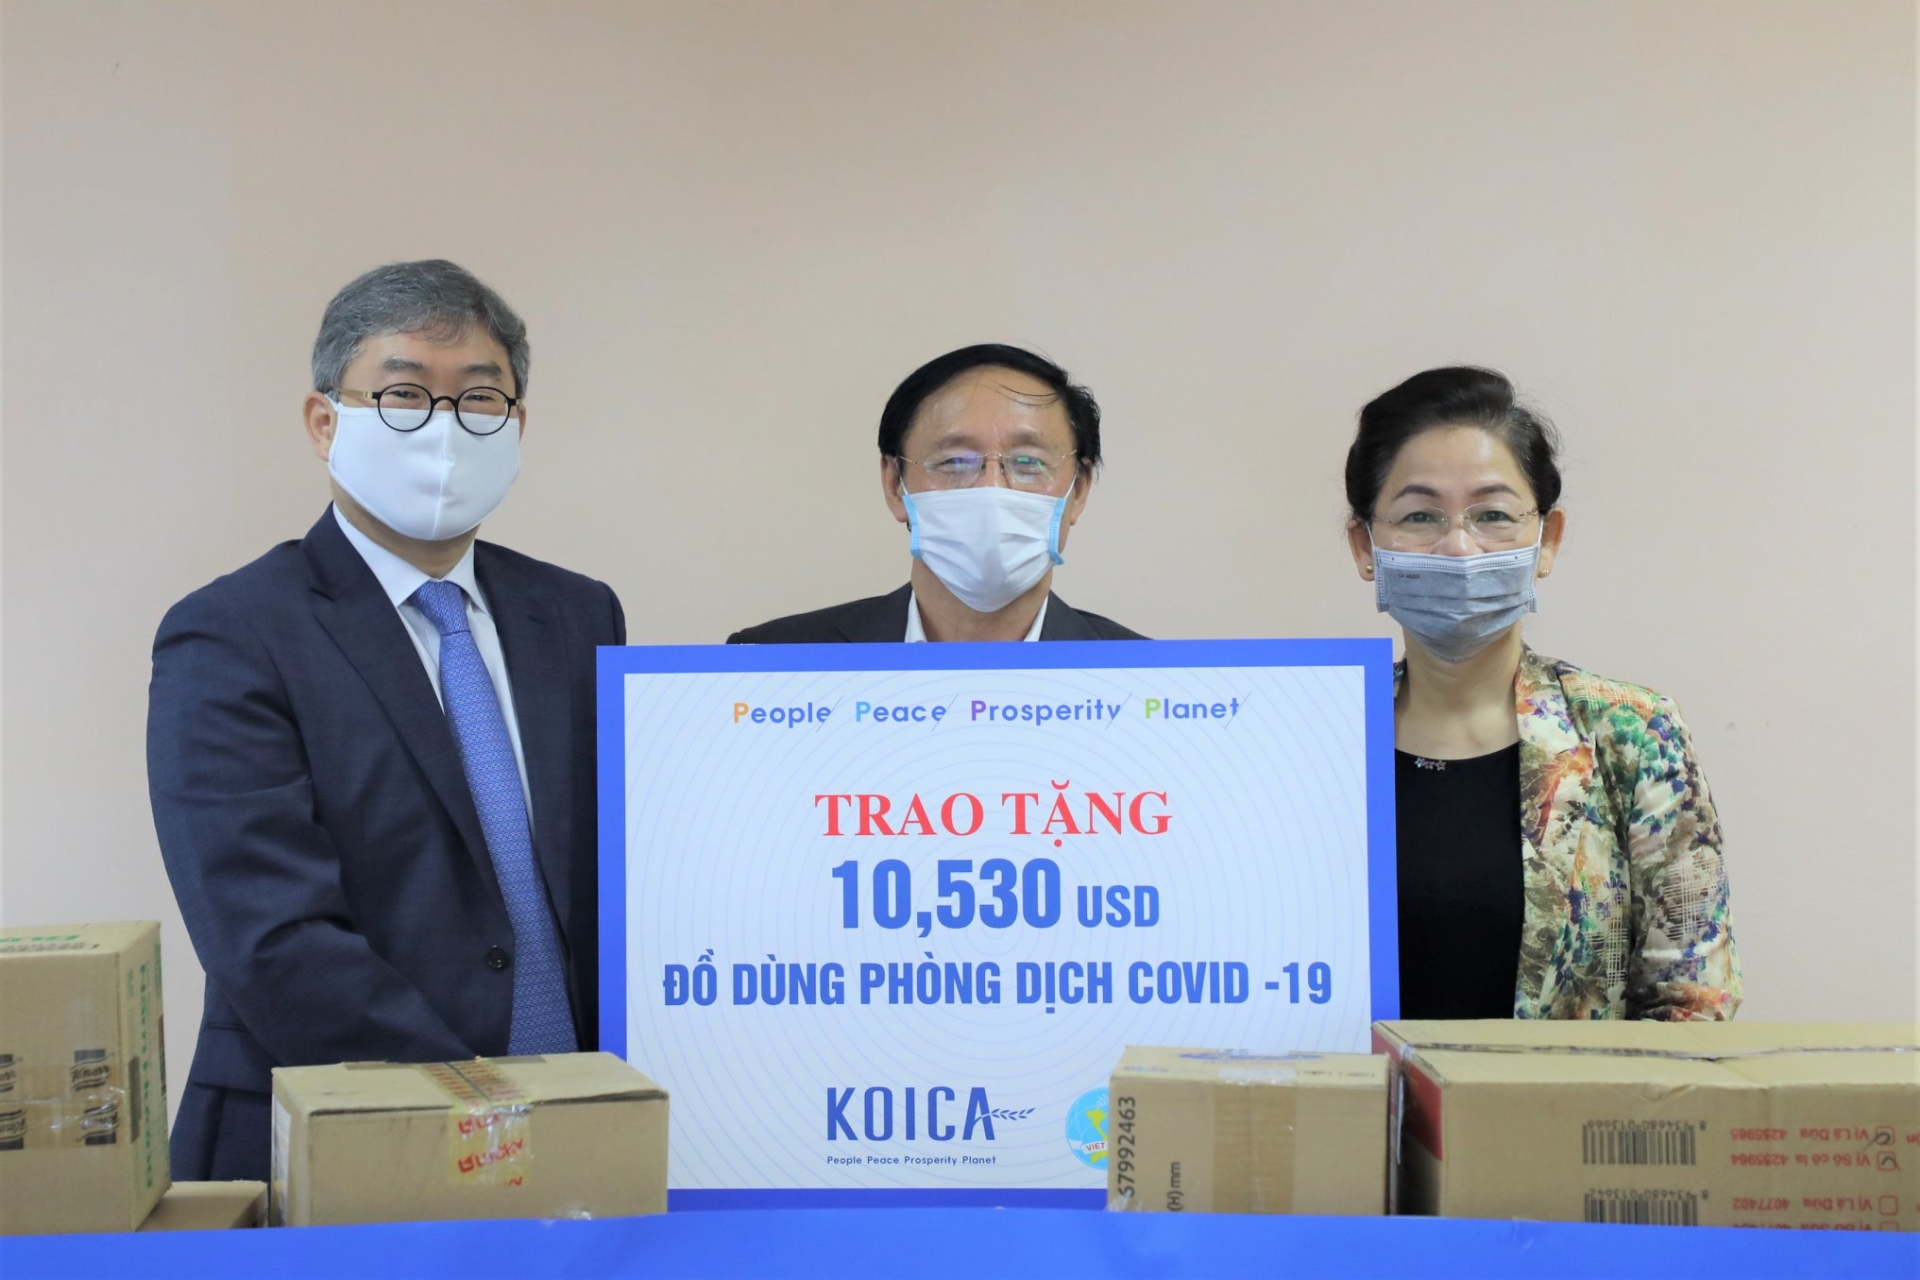 COVID-19: KOICA supports over USD 10,000 support package for needy women in Hanoi